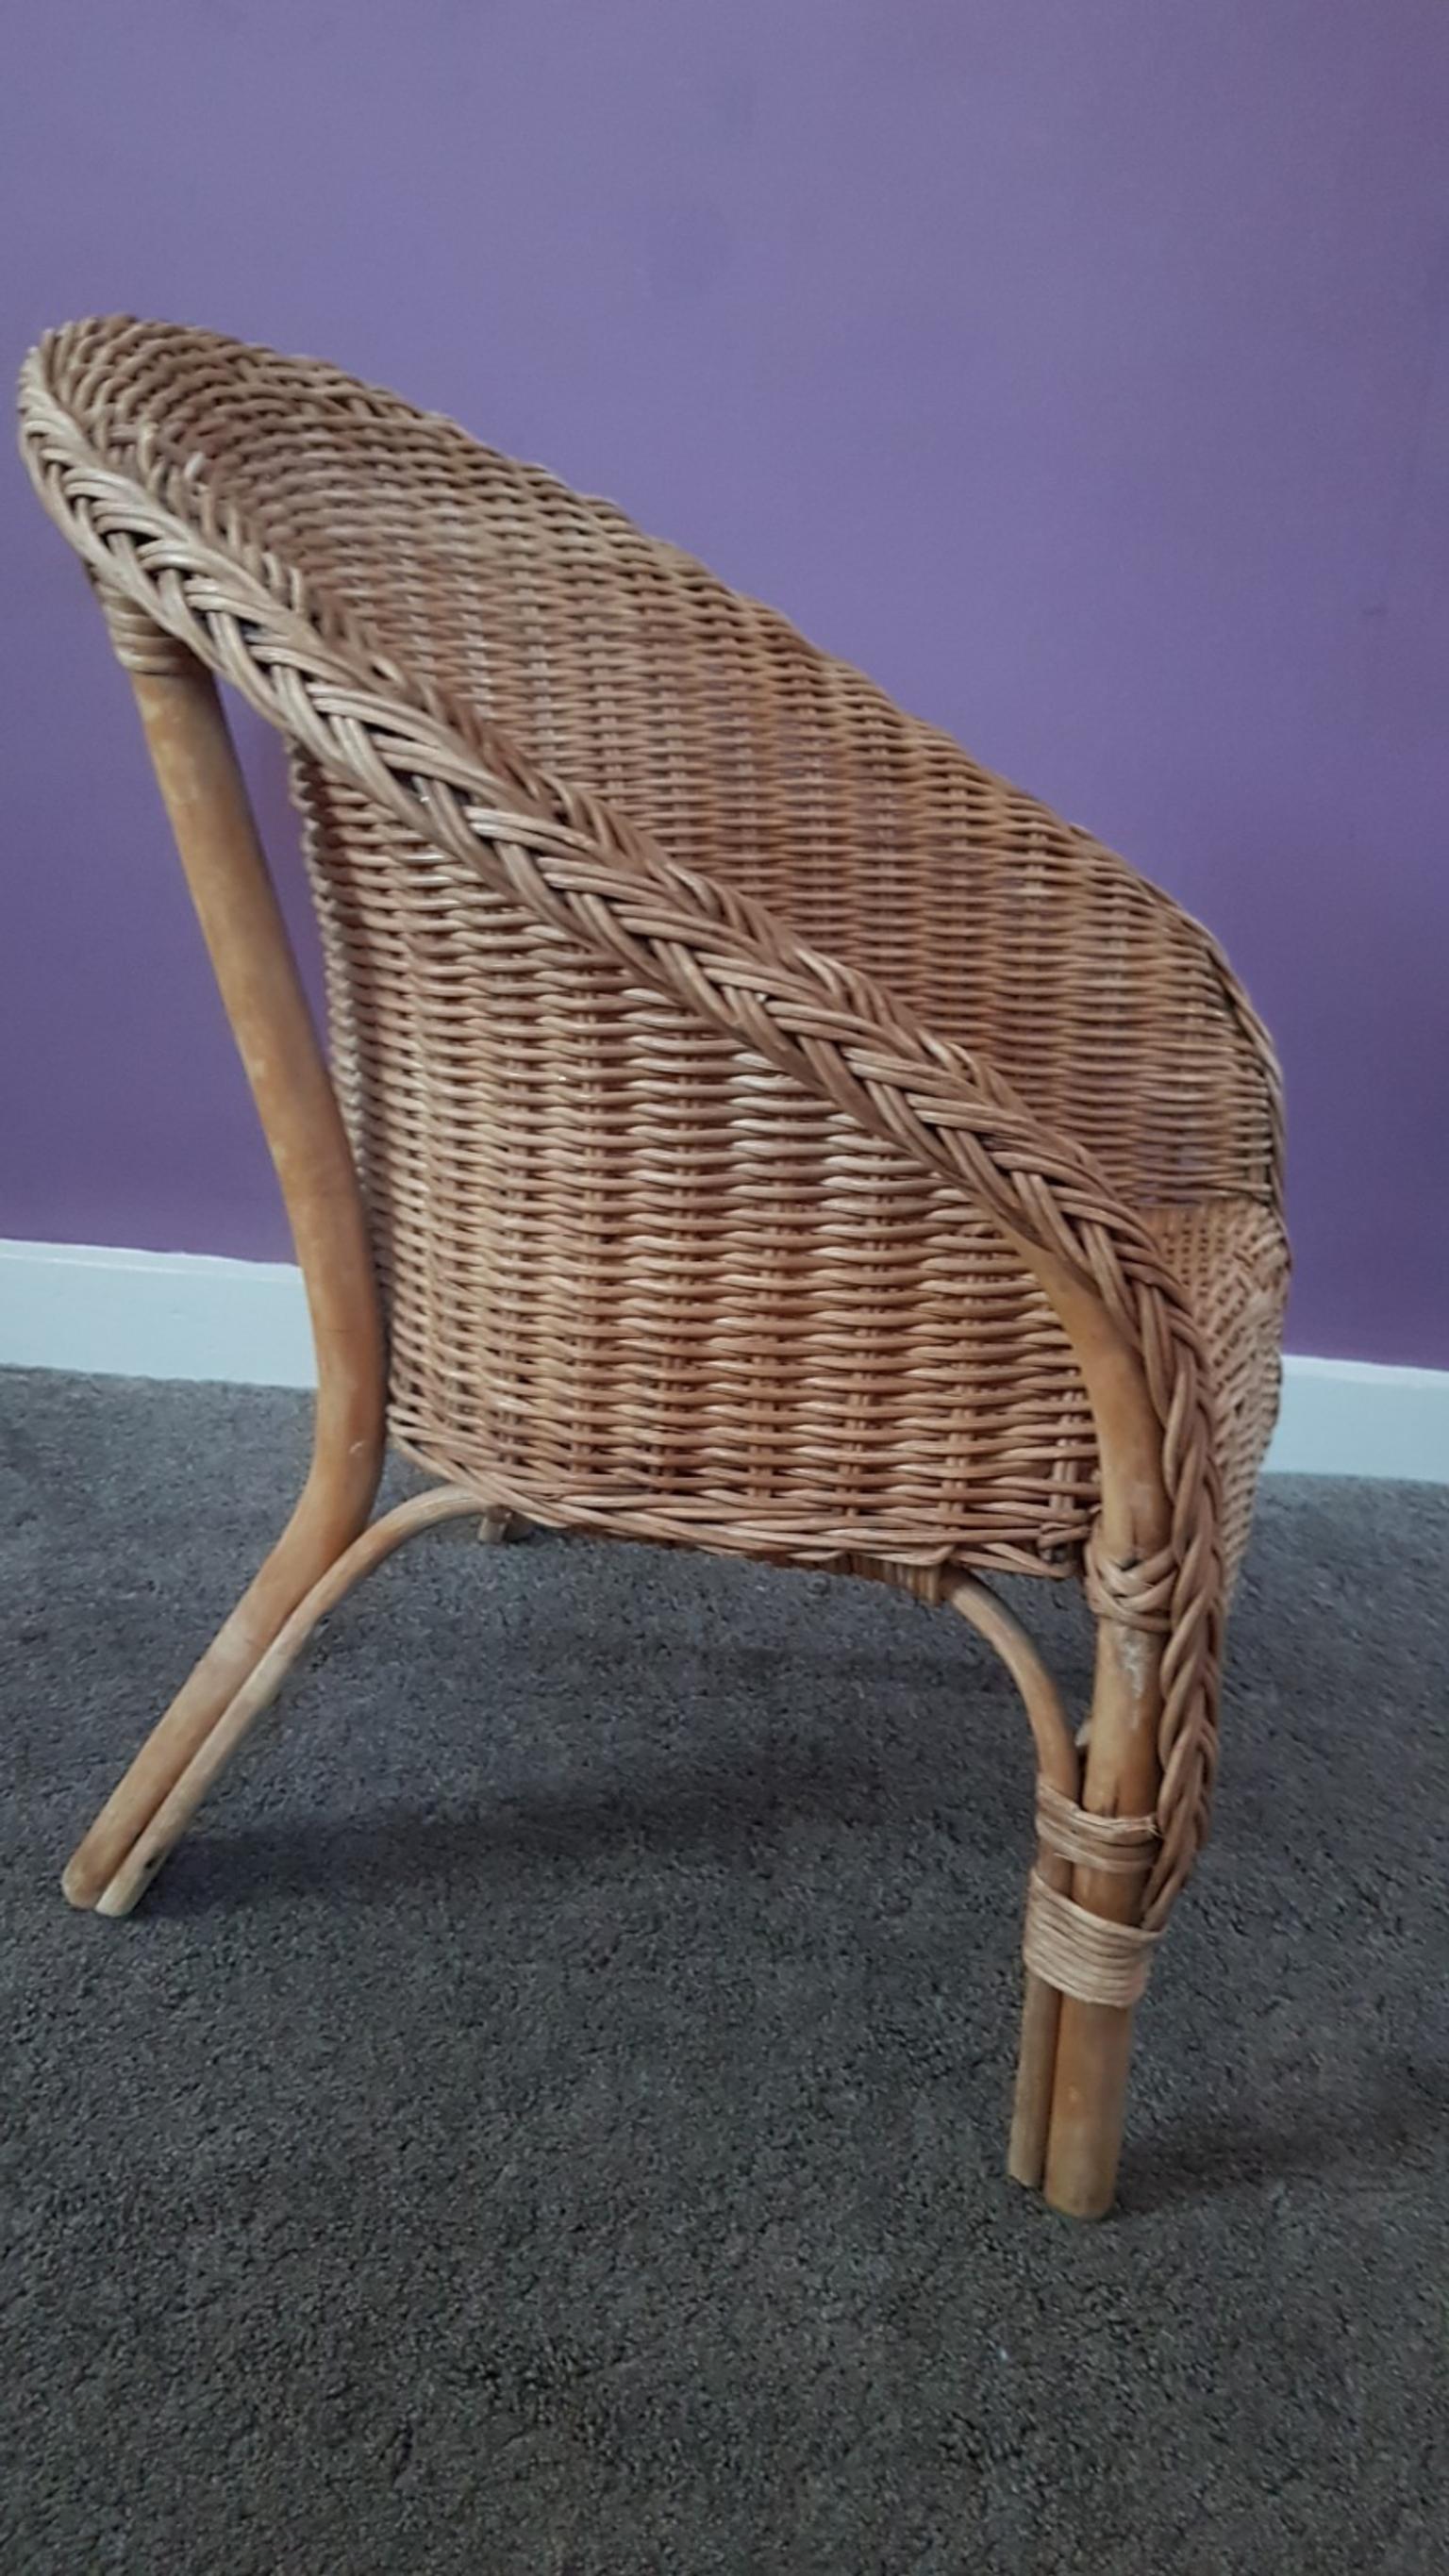 Kids Wicker Chair In Sm4 London For 1000 For Sale Shpock